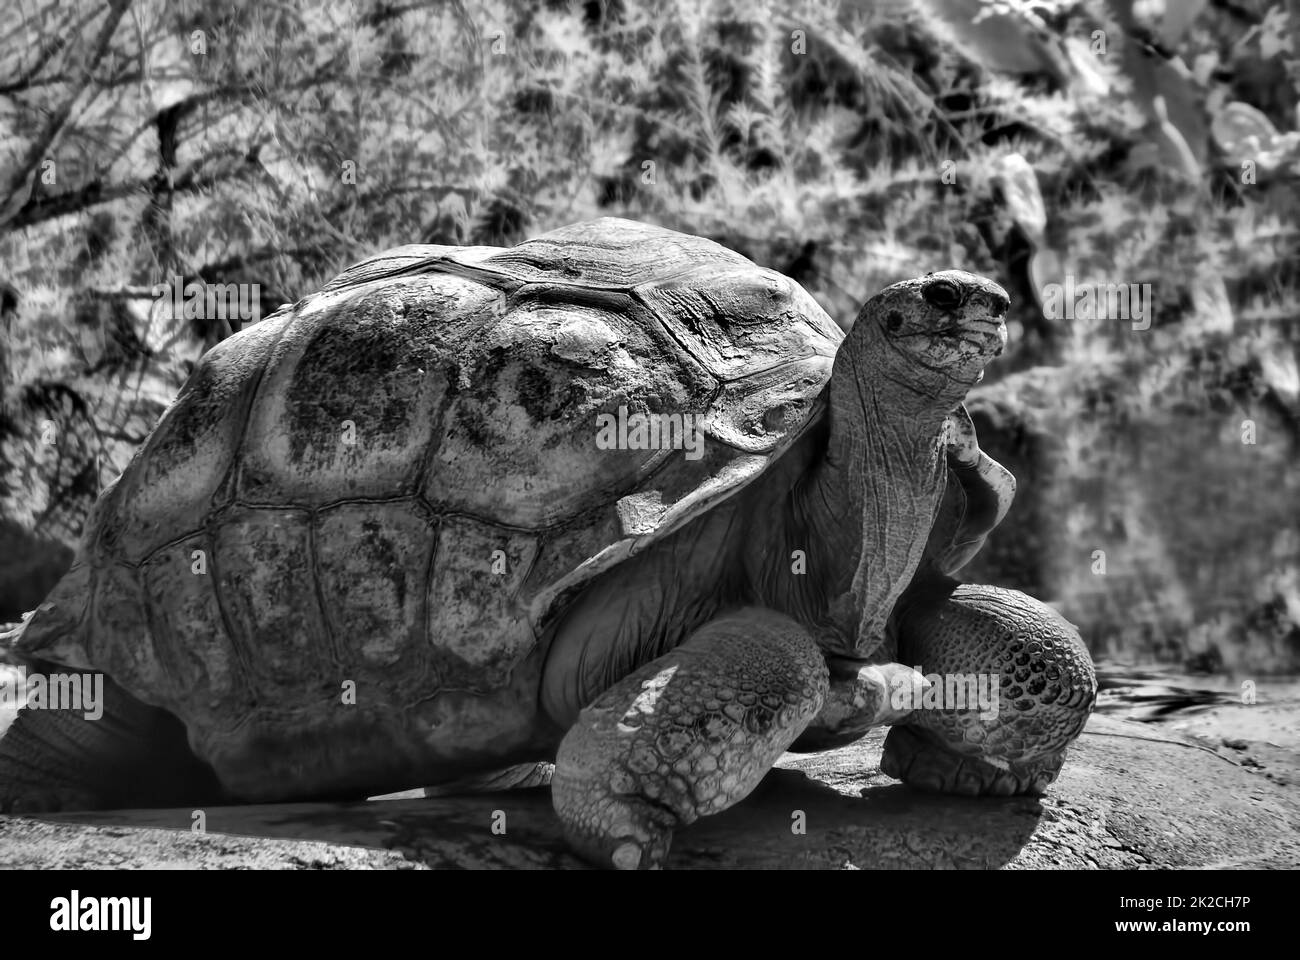 Tortue des Galapagos Banque D'Images